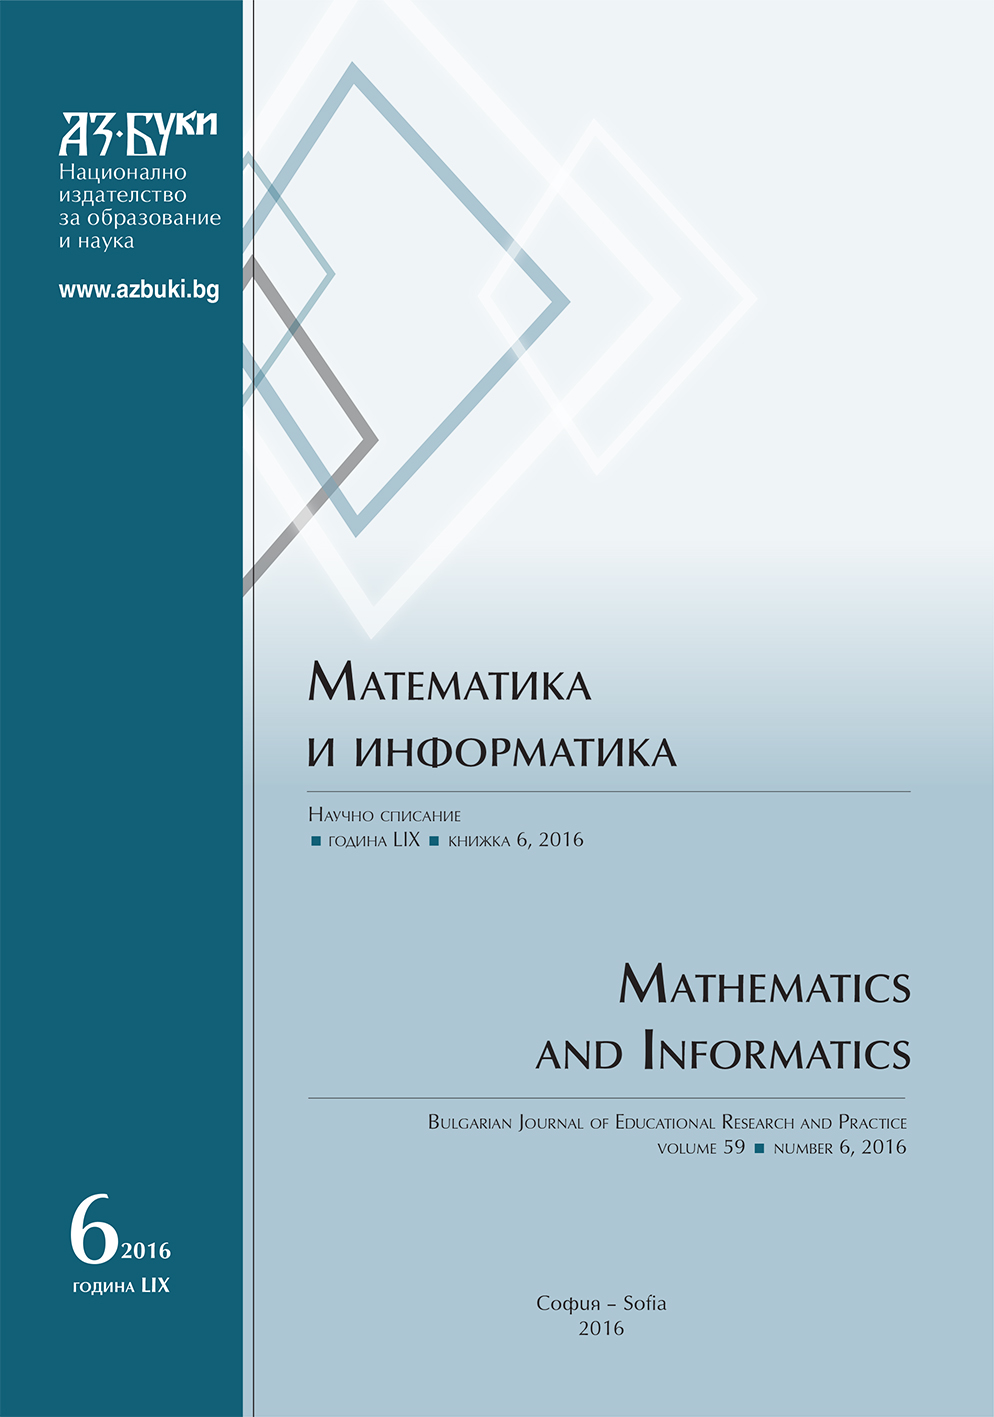 Pseudocenter and Orthocenter – Notable Points in the Quadrilateral Cover Image